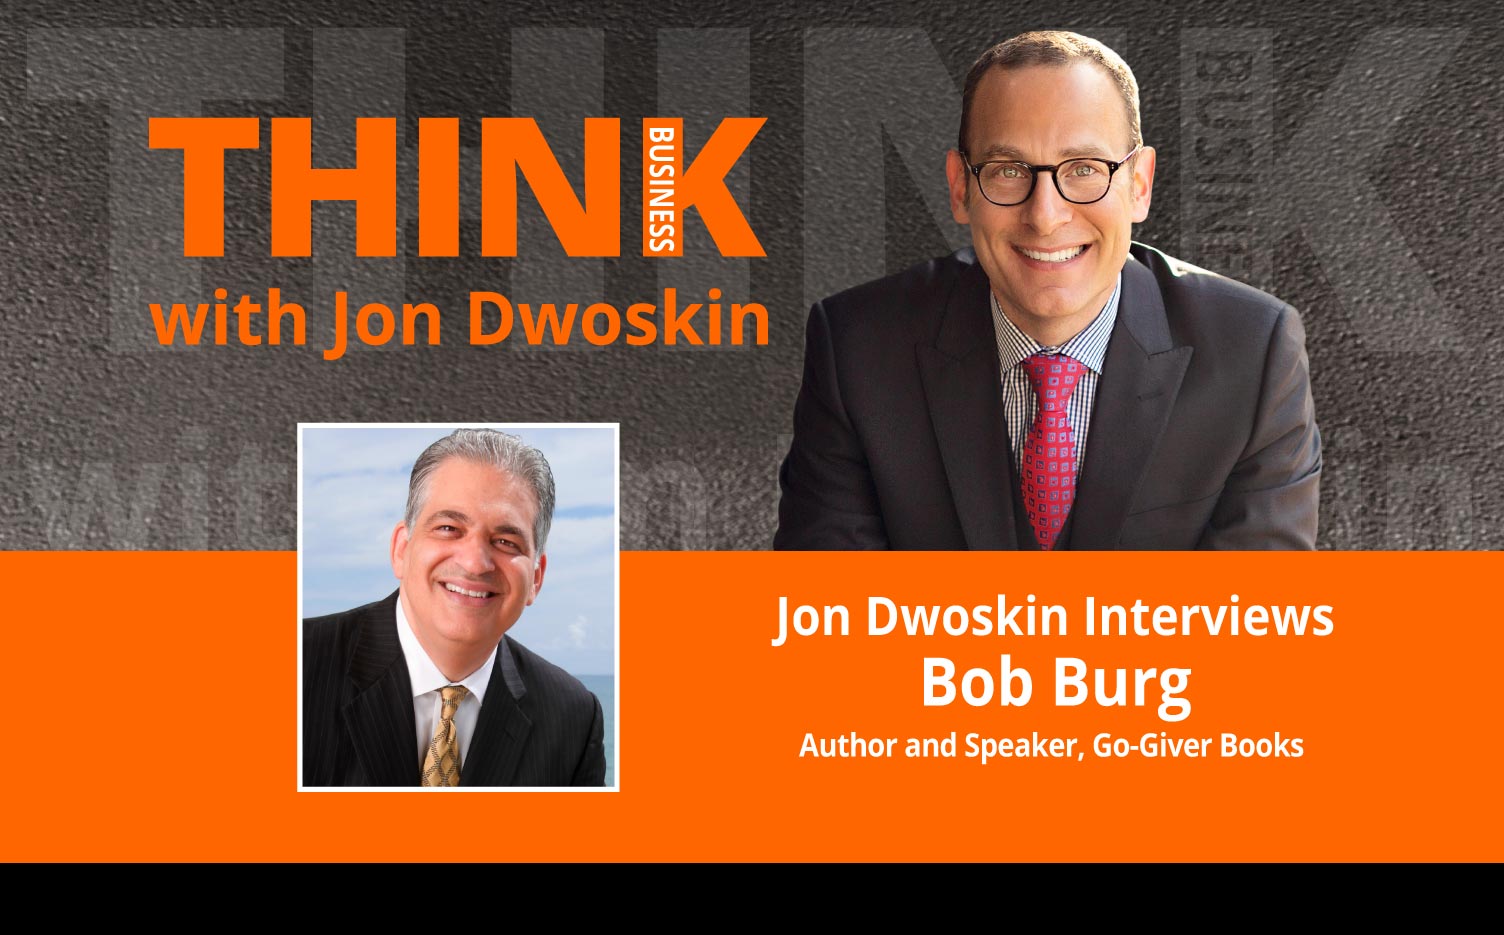 THINK Business Podcast: Jon Dwoskin Interviews Bob Burg, Author and Speaker, Go-Giver Books 